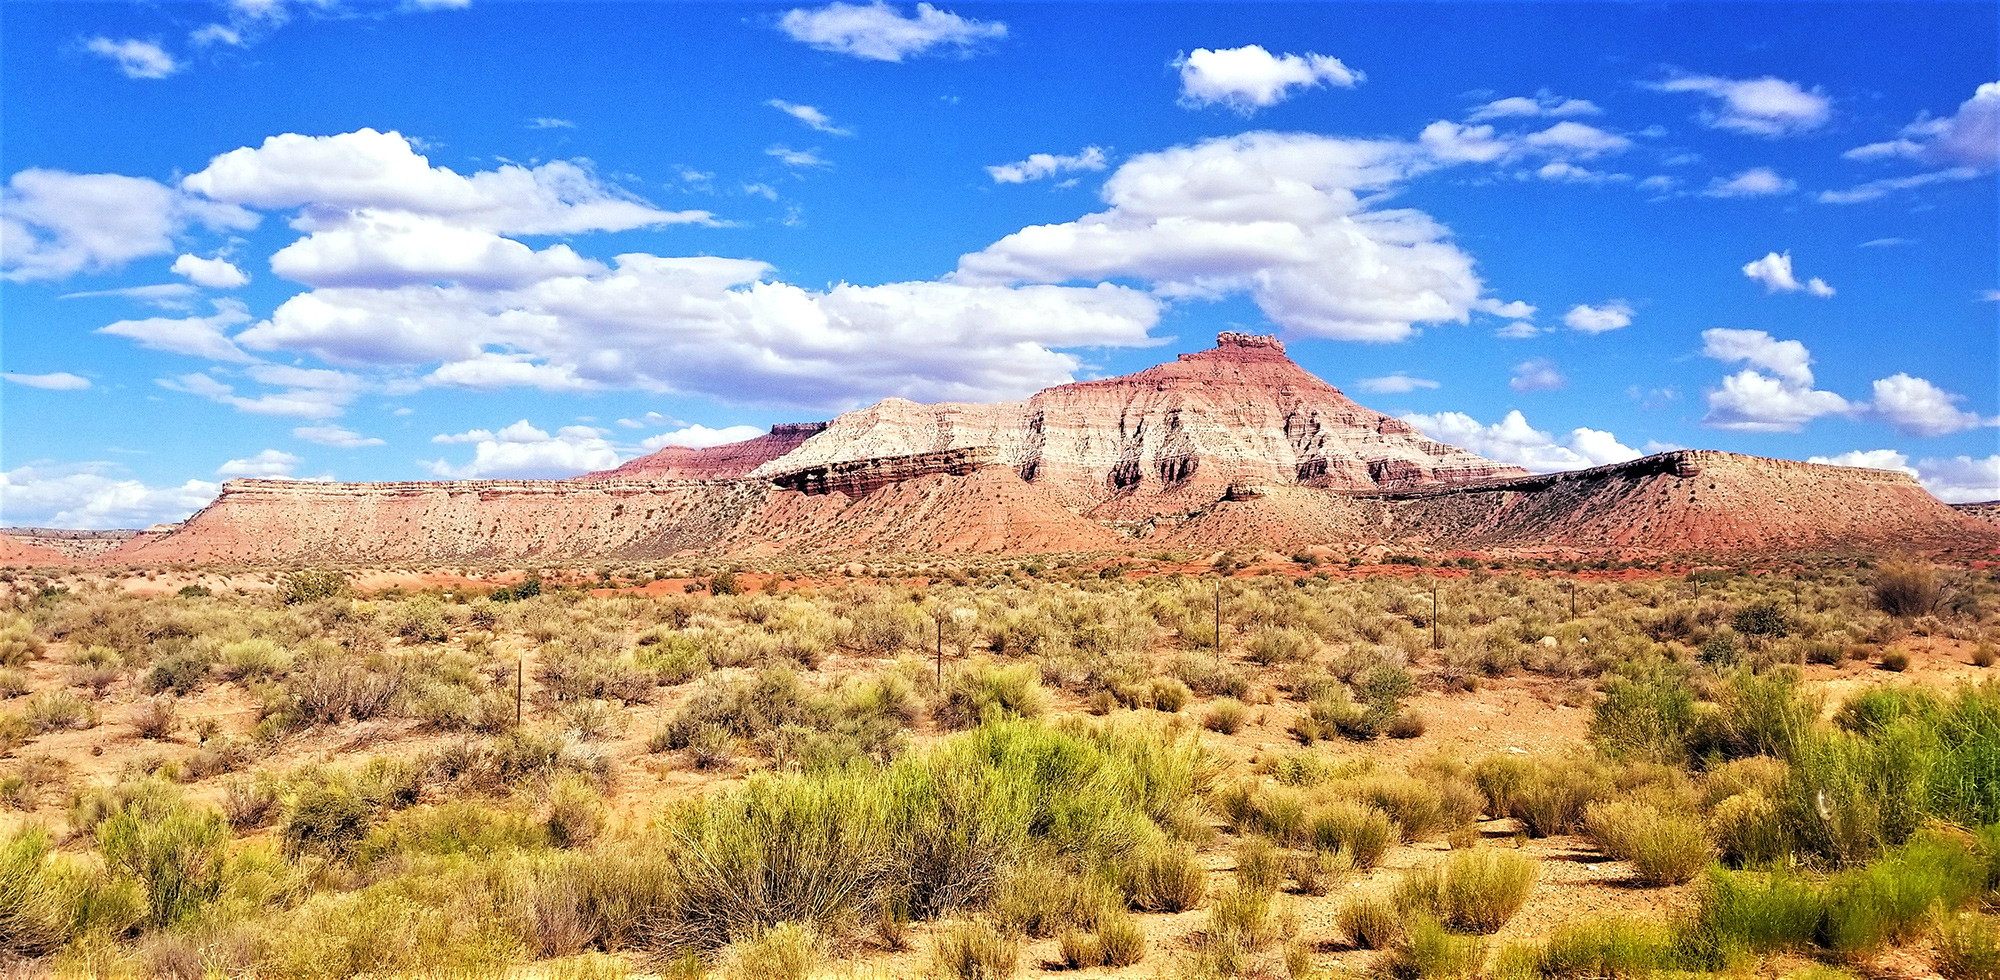 Utah landscape of desert brush, mountain buttes, and a blue sky with puffy white clouds